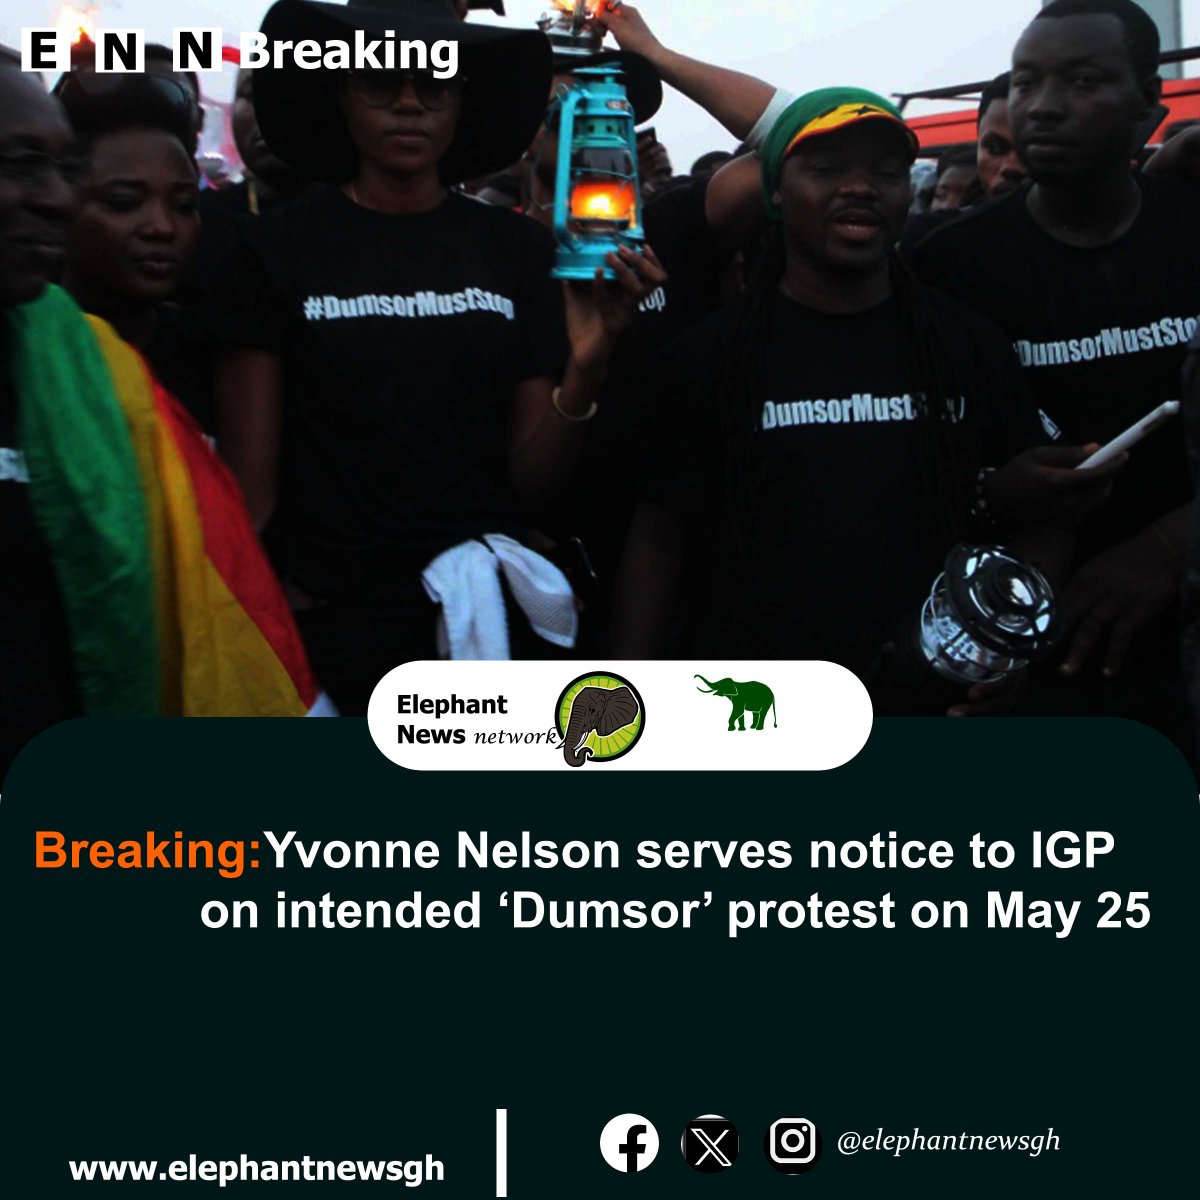 'Yvonne Nelson plans 'Dumsor' protest on May 25, serves notice to IGP. Let's stand against power outages! #DumsorProtest #YvonneNelson #Ghana'